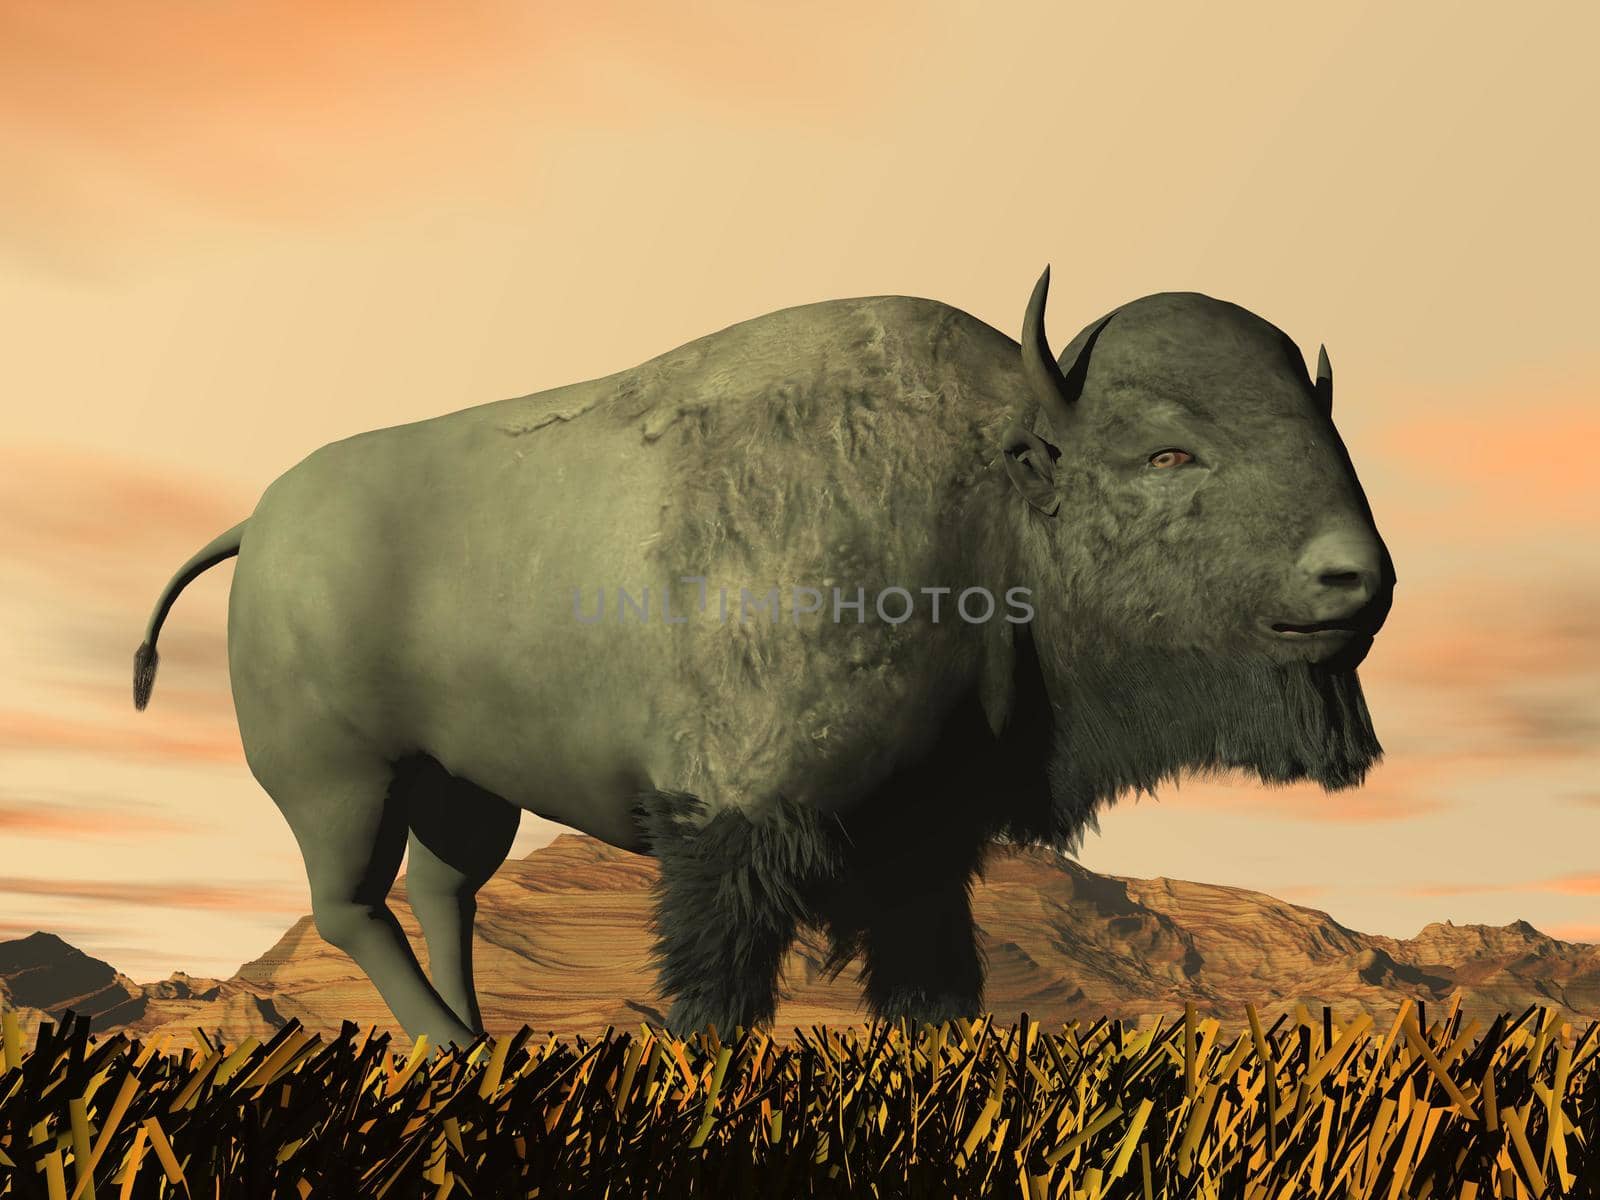 One bison standing in yellow grass in front of rocky mountain by sunset